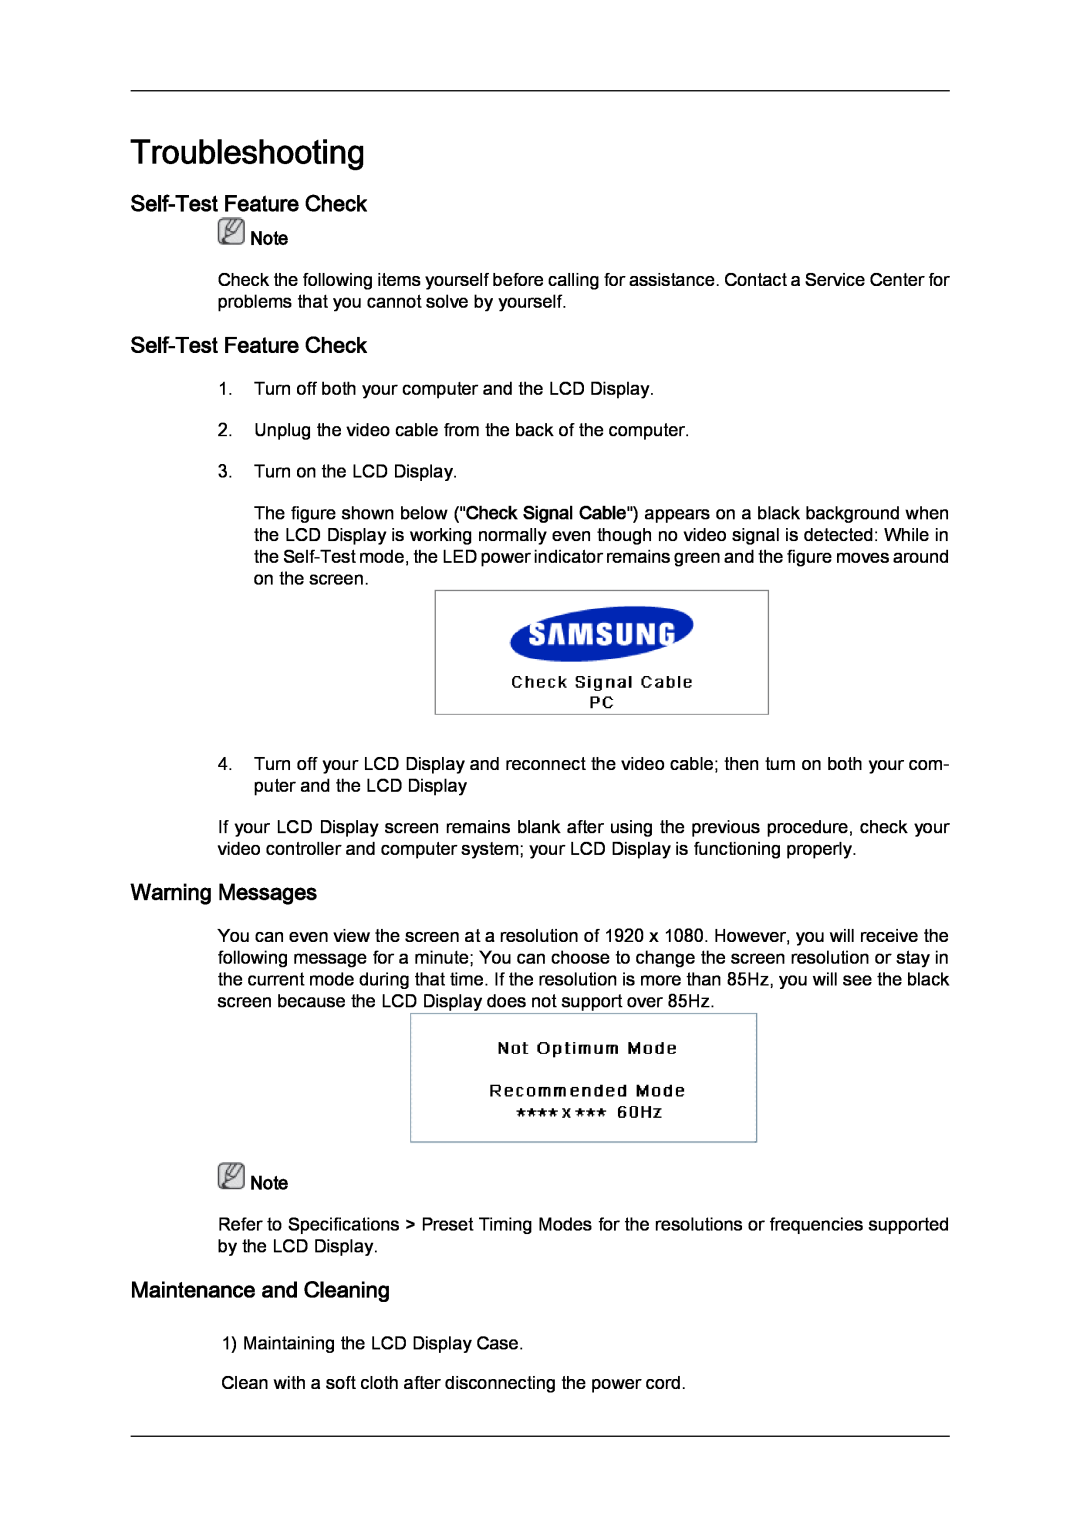 Samsung 650MP-2, 650FP-2 user manual Troubleshooting, Self-Test Feature Check, Warning Messages, Maintenance and Cleaning 